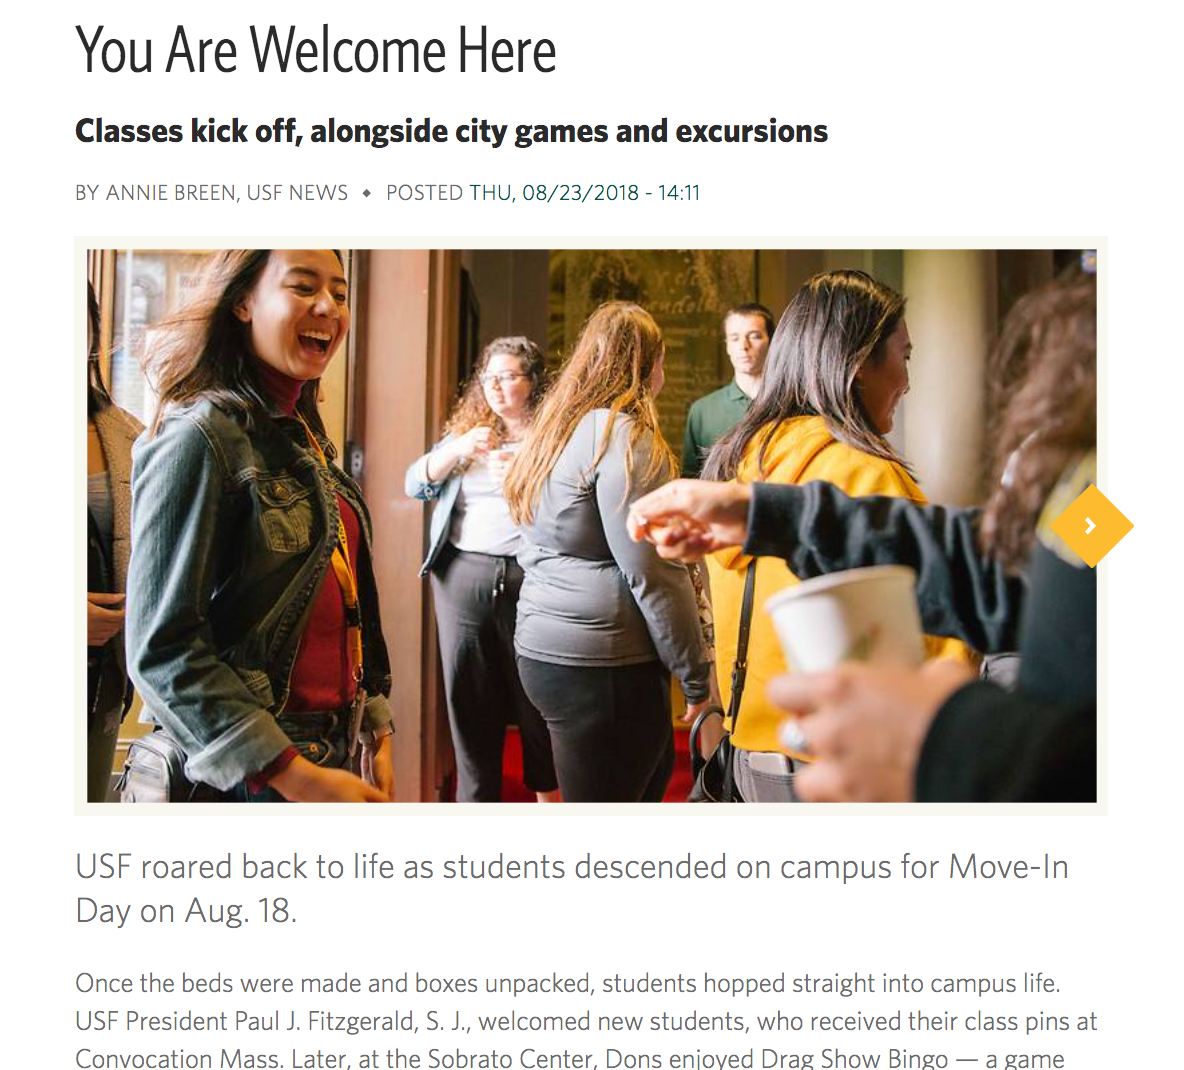 https://www.usfca.edu/news/you-are-welcome-here